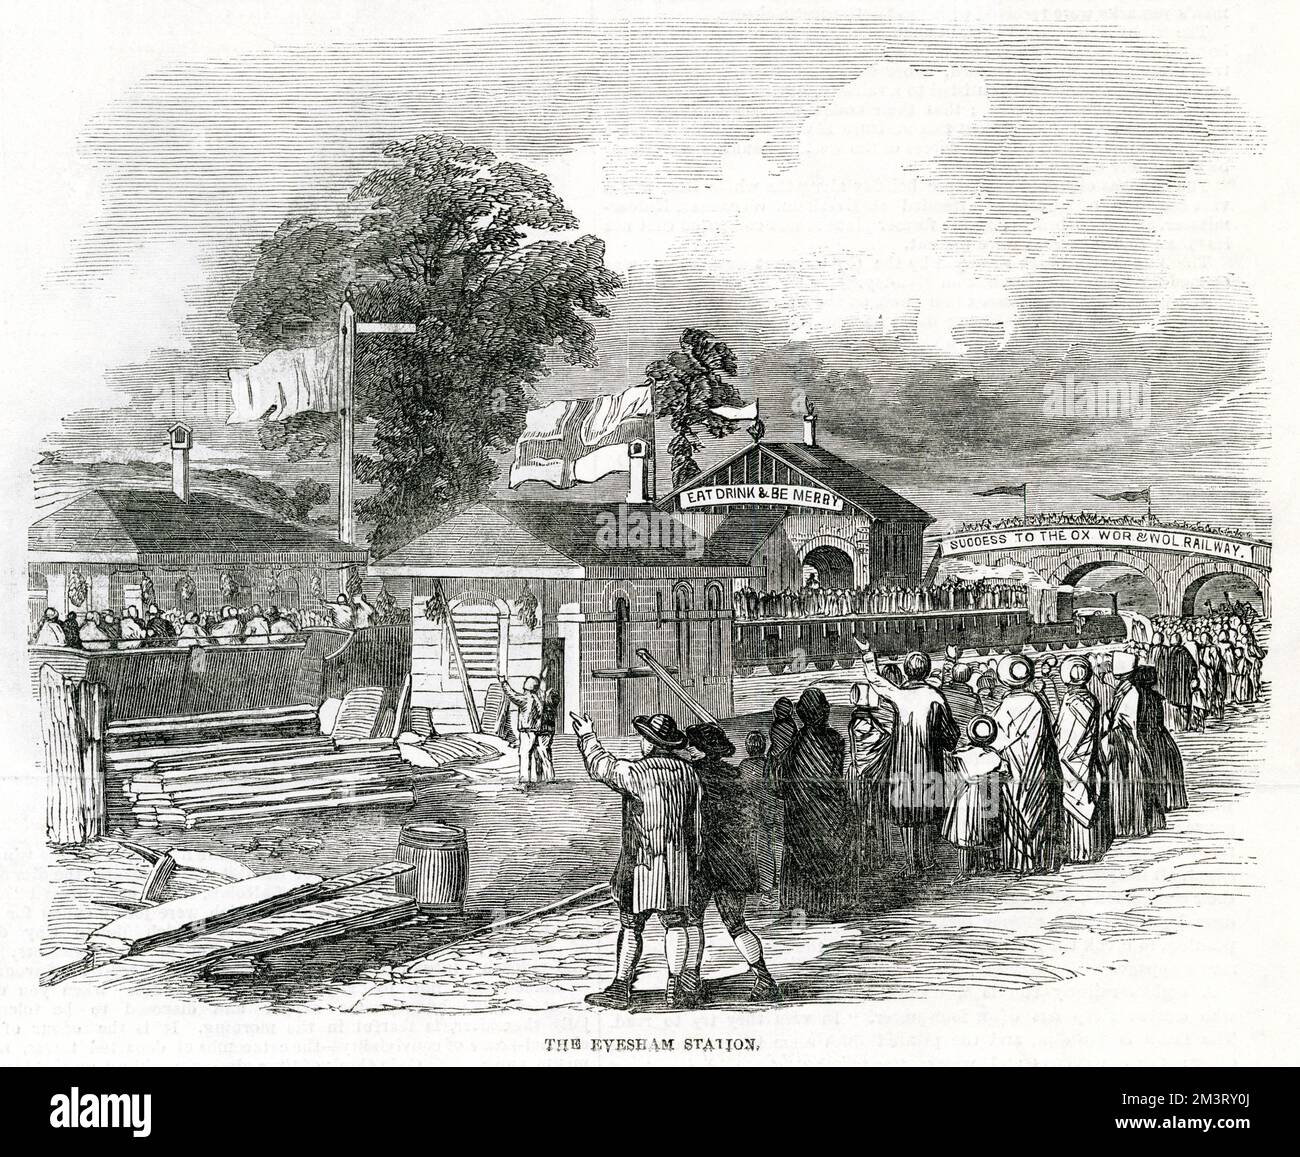 Railway station at Evesham, Worcestershire, on the occasion of its opening.      Date: 1852 Stock Photo